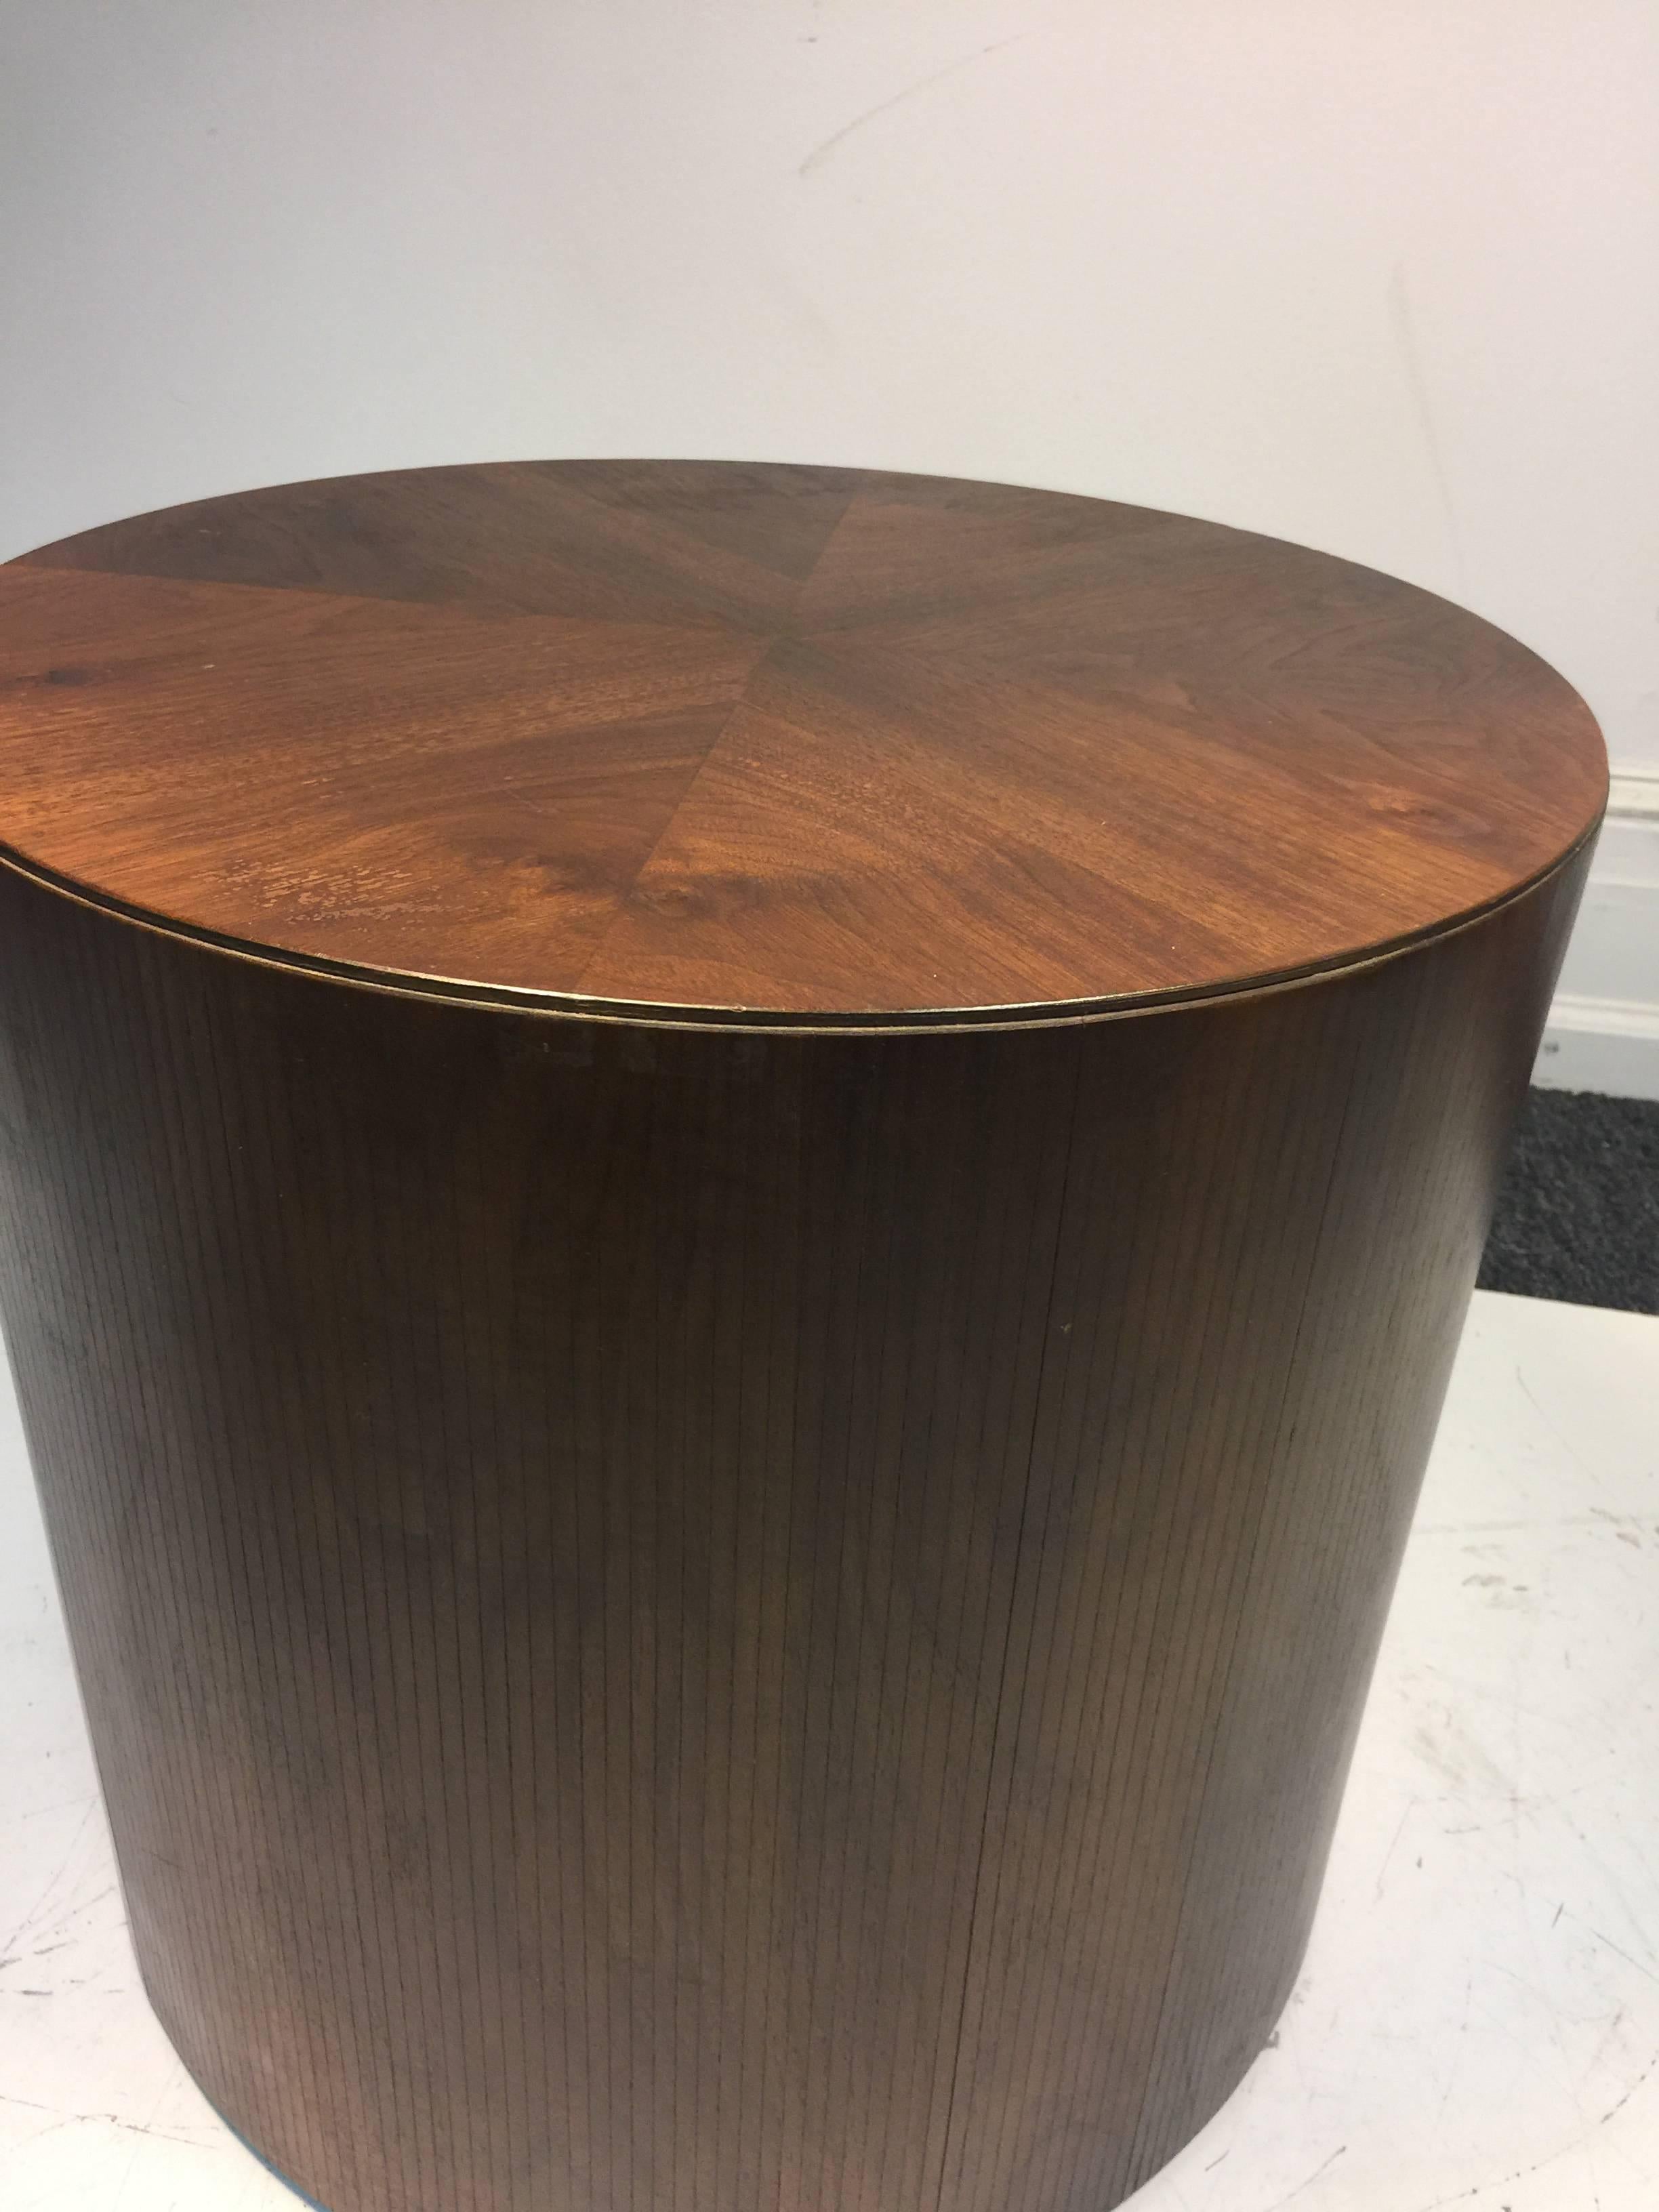 Walnut Substantial Drum Table or Pedestal by Lane For Sale